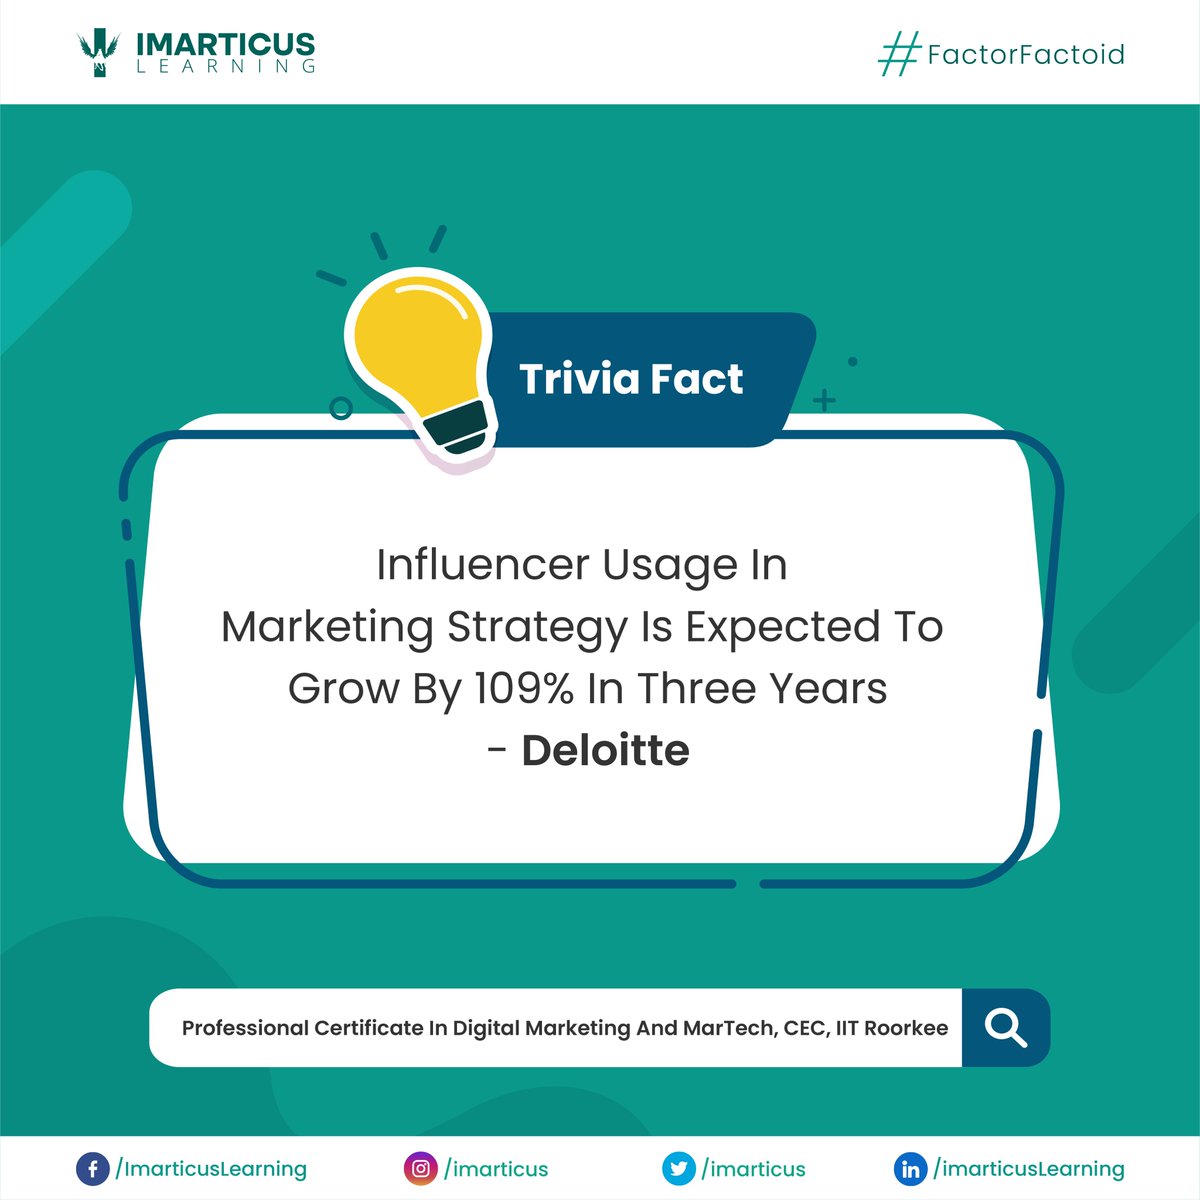 Did you know that influencers are set to play a crucial role in marketing strategies across businesses? More than what they do now! This trend is just one of the many that are going to impact the industry in the long term.